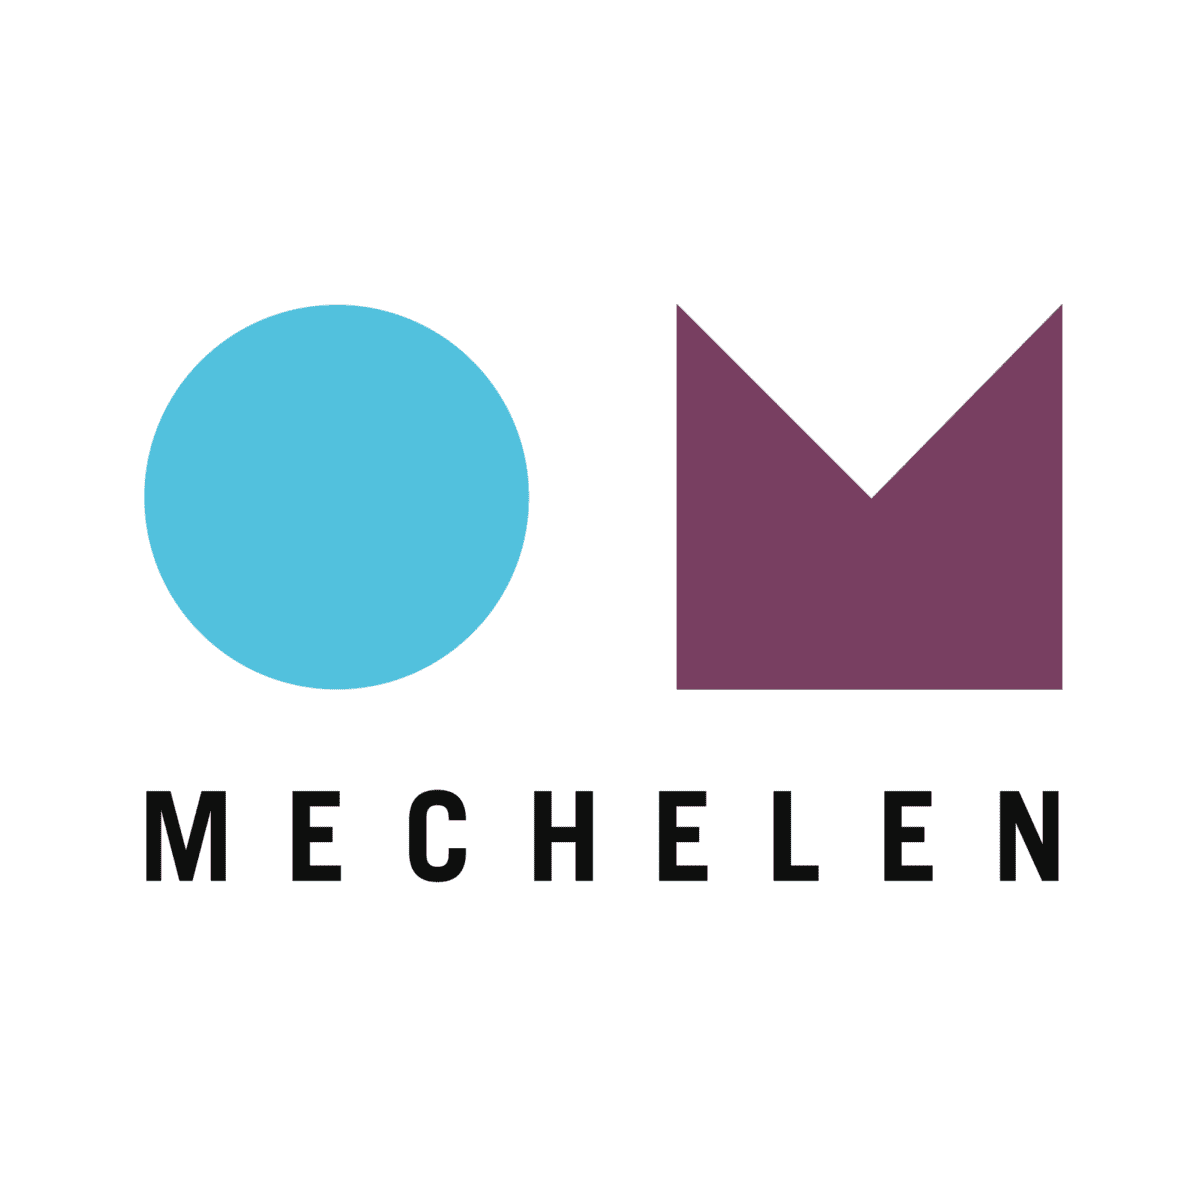 The city of Mechelen, heart of the River Region, is situated between Antwerp and Brussels and stands for an innovative city, biking, green, inclusive and climate neutrality.